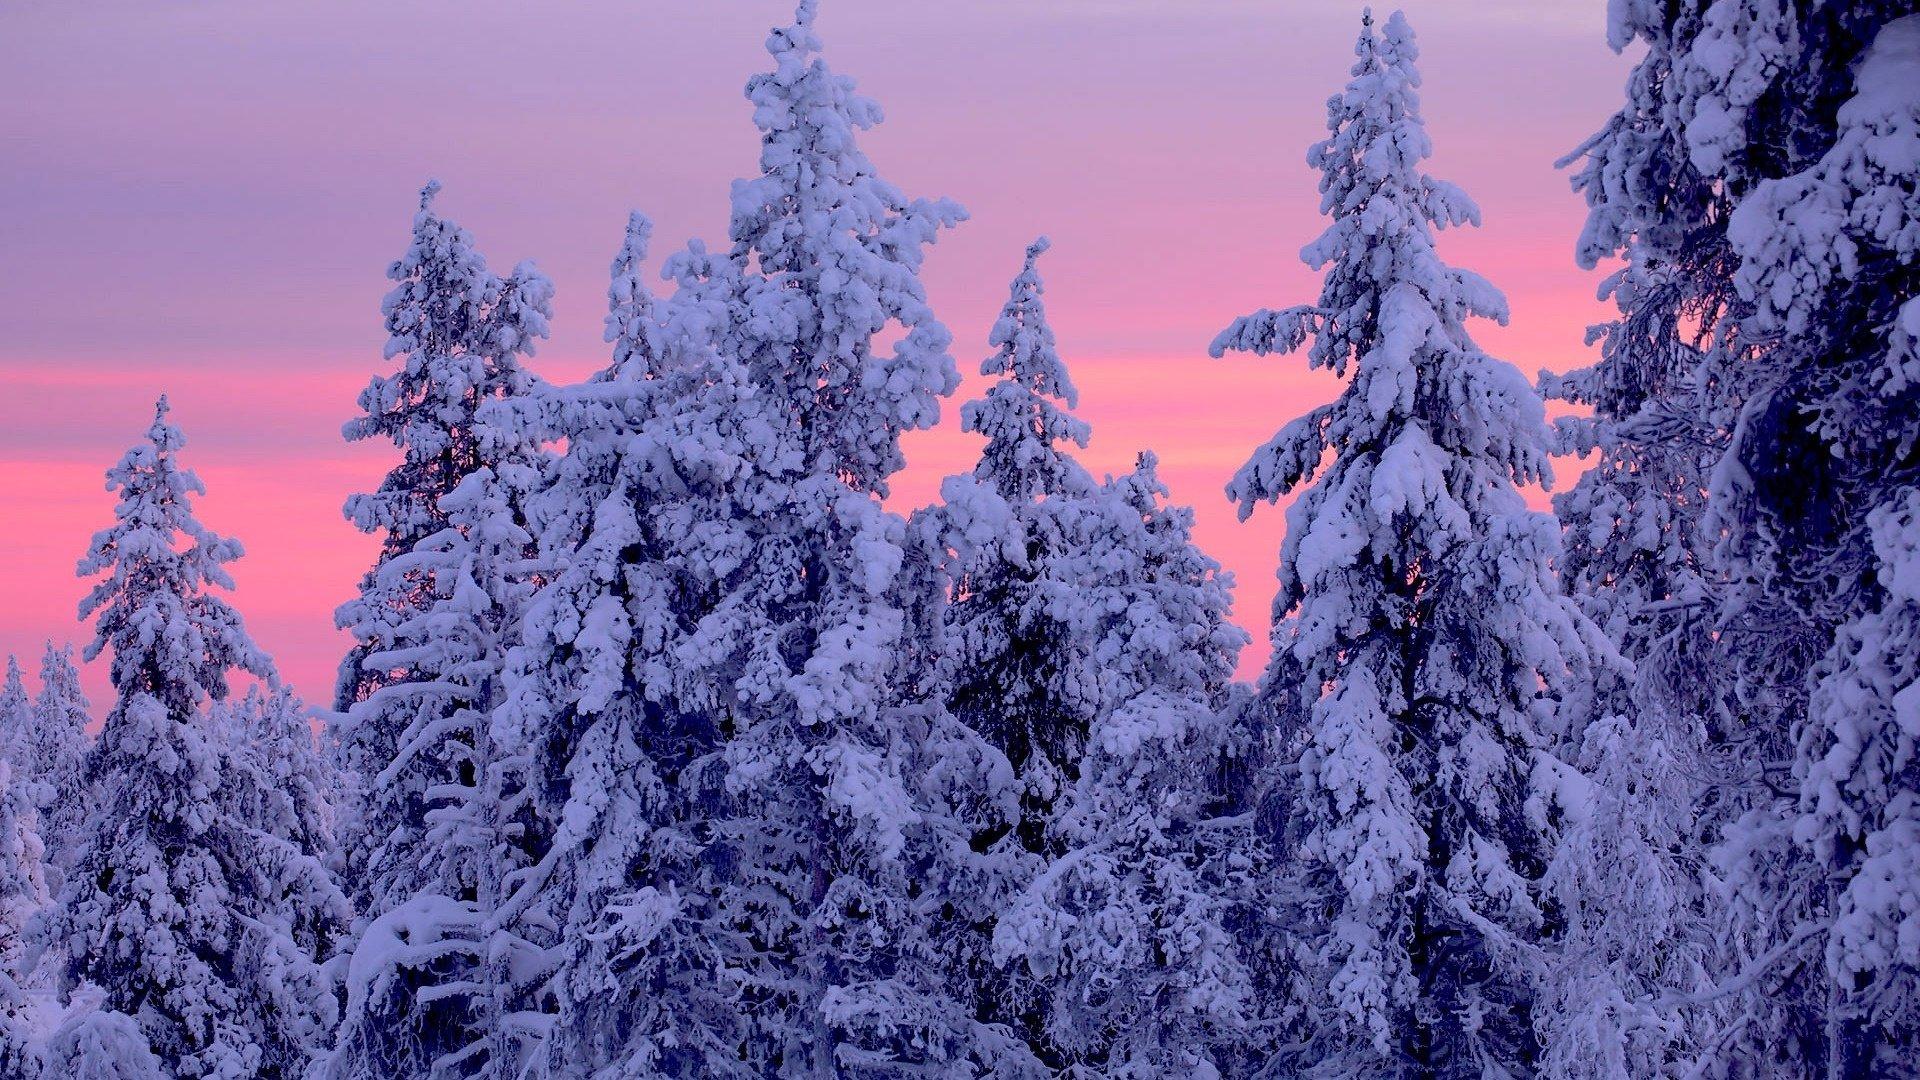 Pink Sunset over Snowy Winter Forest HD Wallpaper. Background